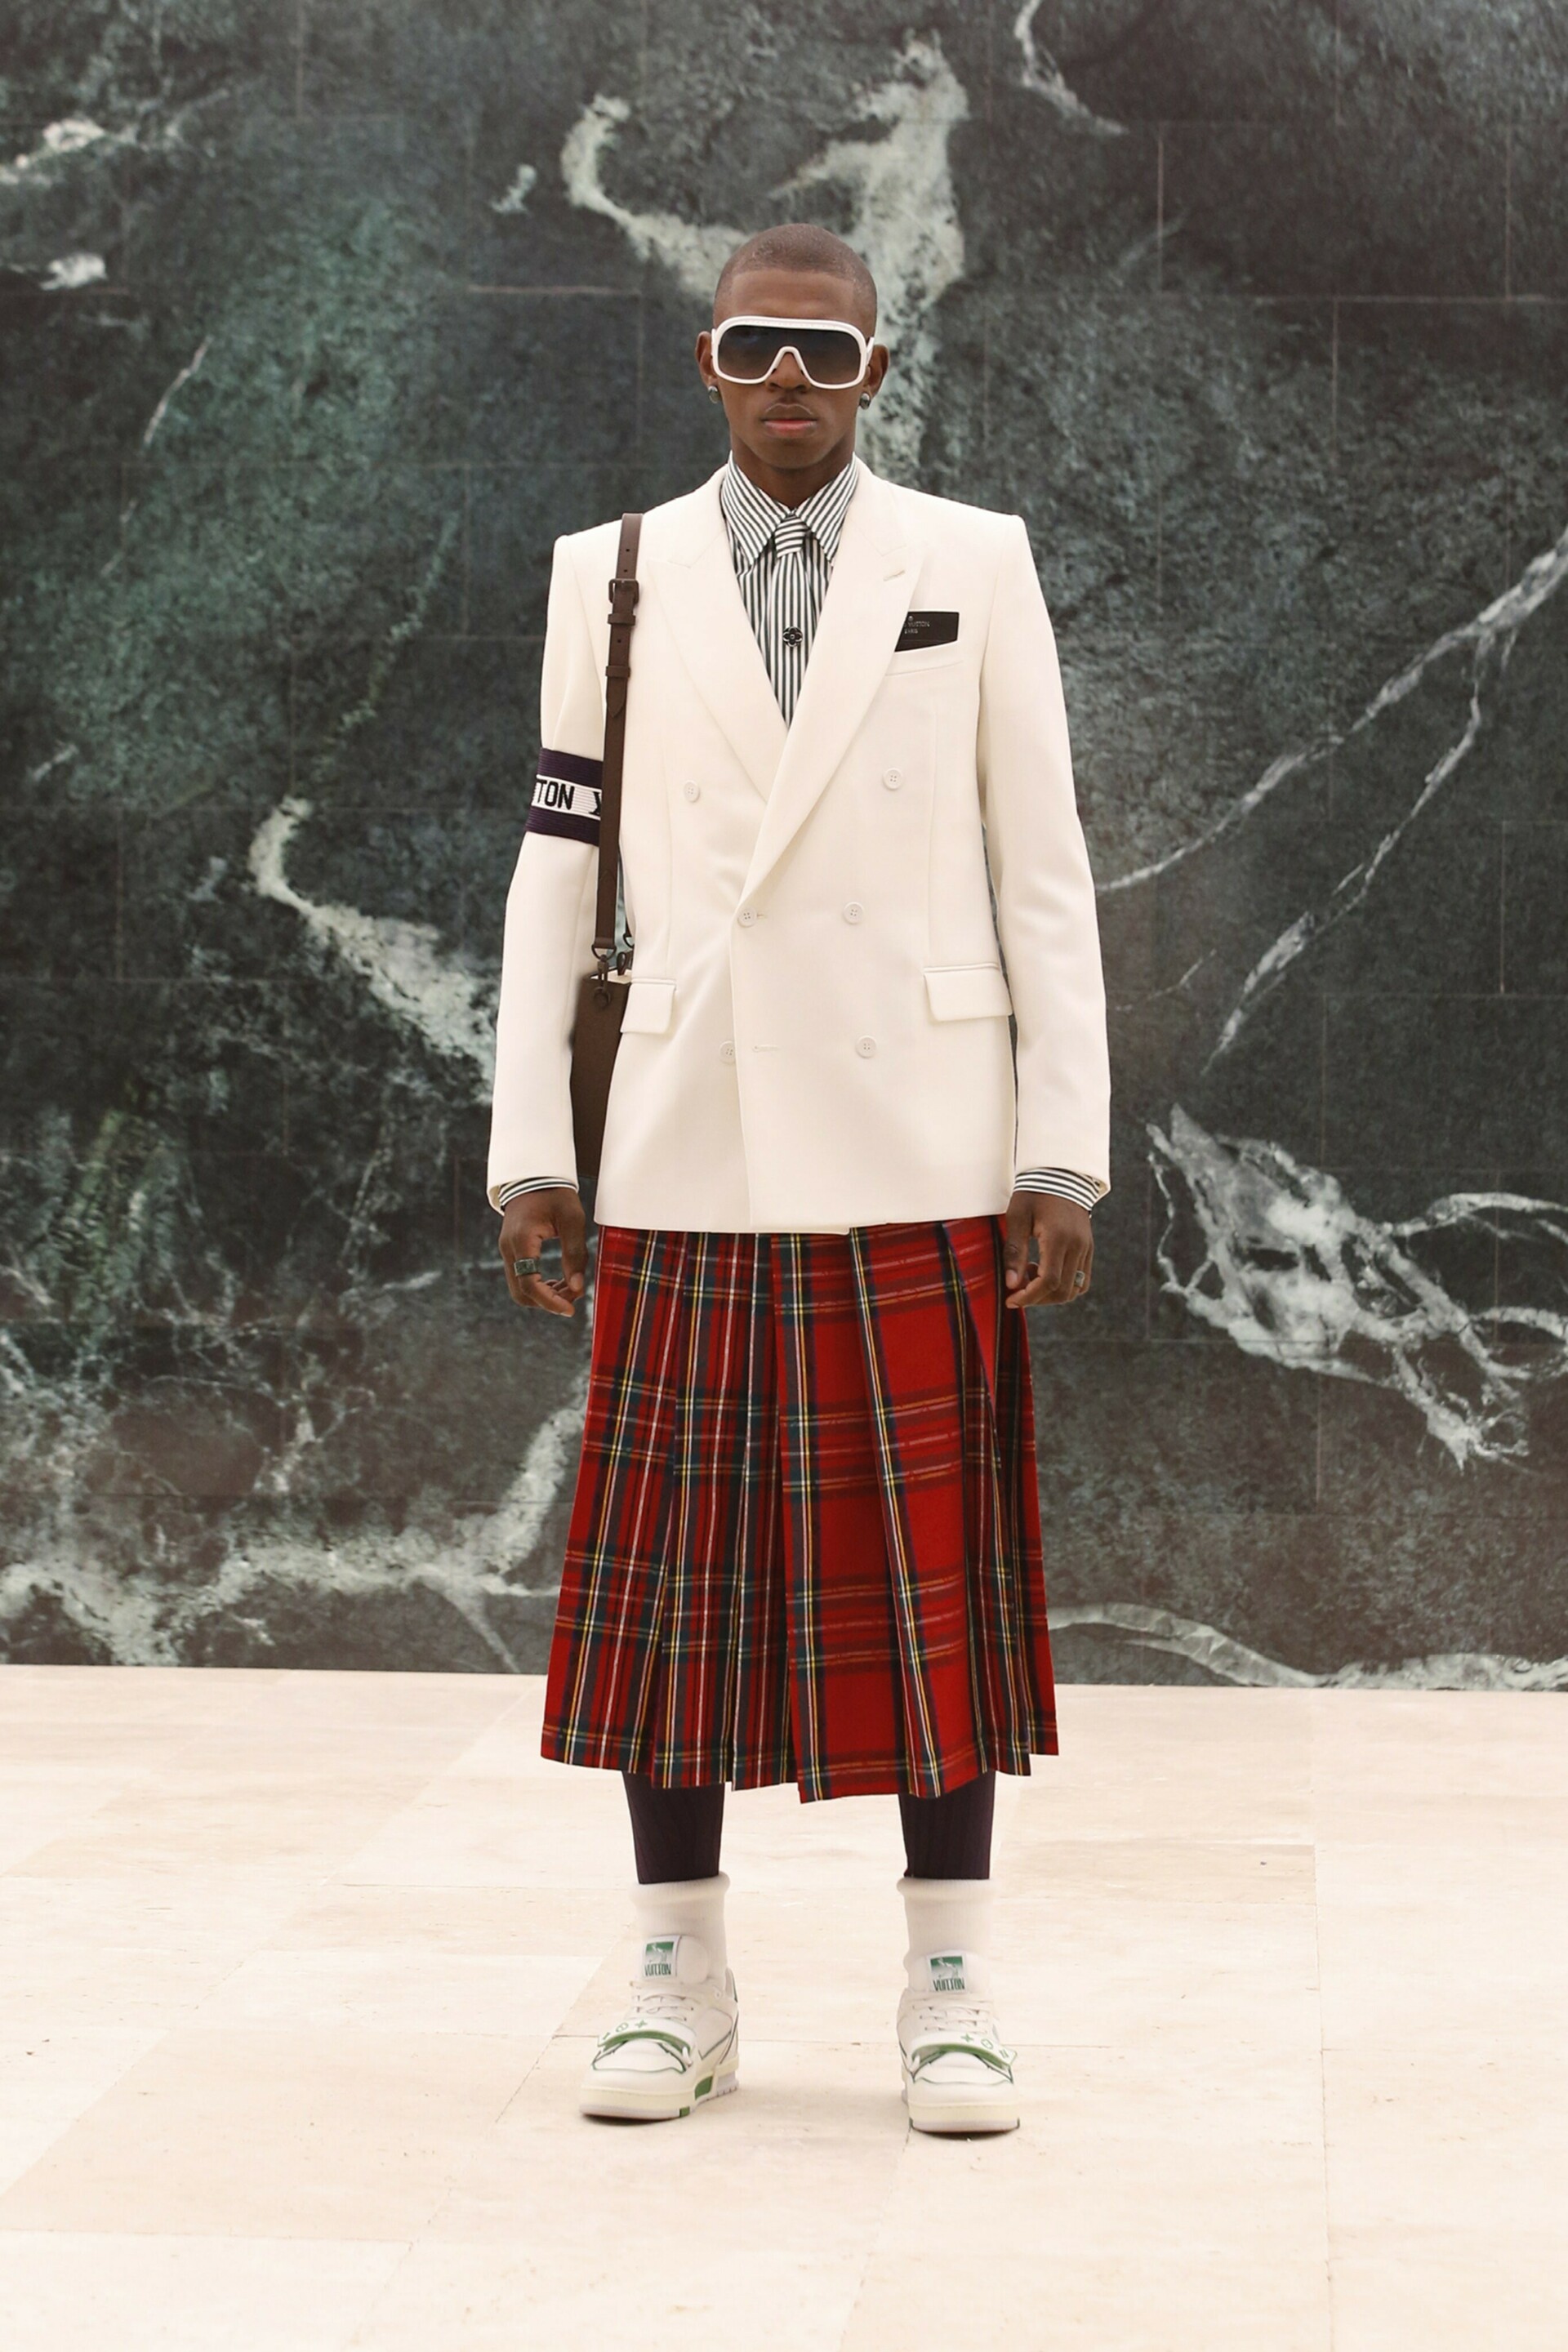 Louis Vuitton's Virgil Abloh showcases men in dresses and skirts